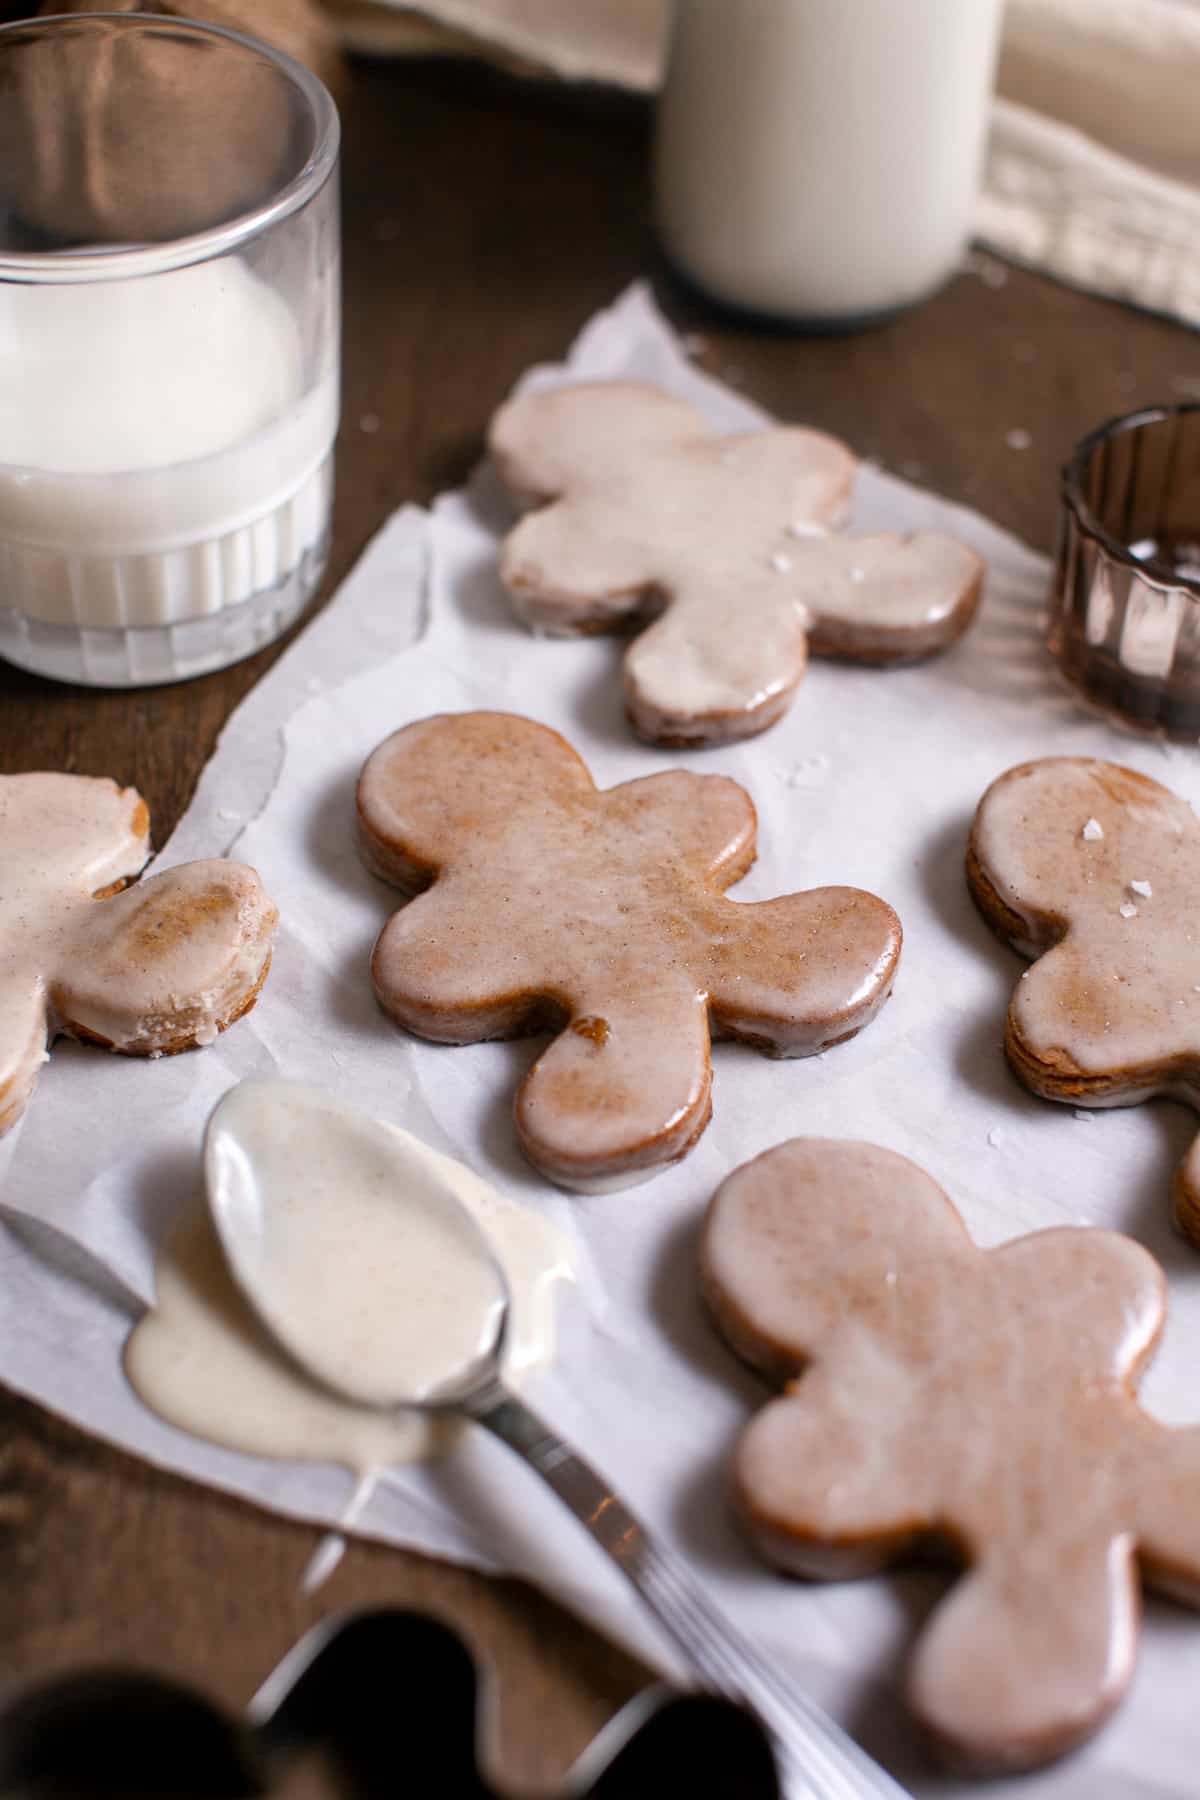 Gingerbread sitting by a glass of milk.